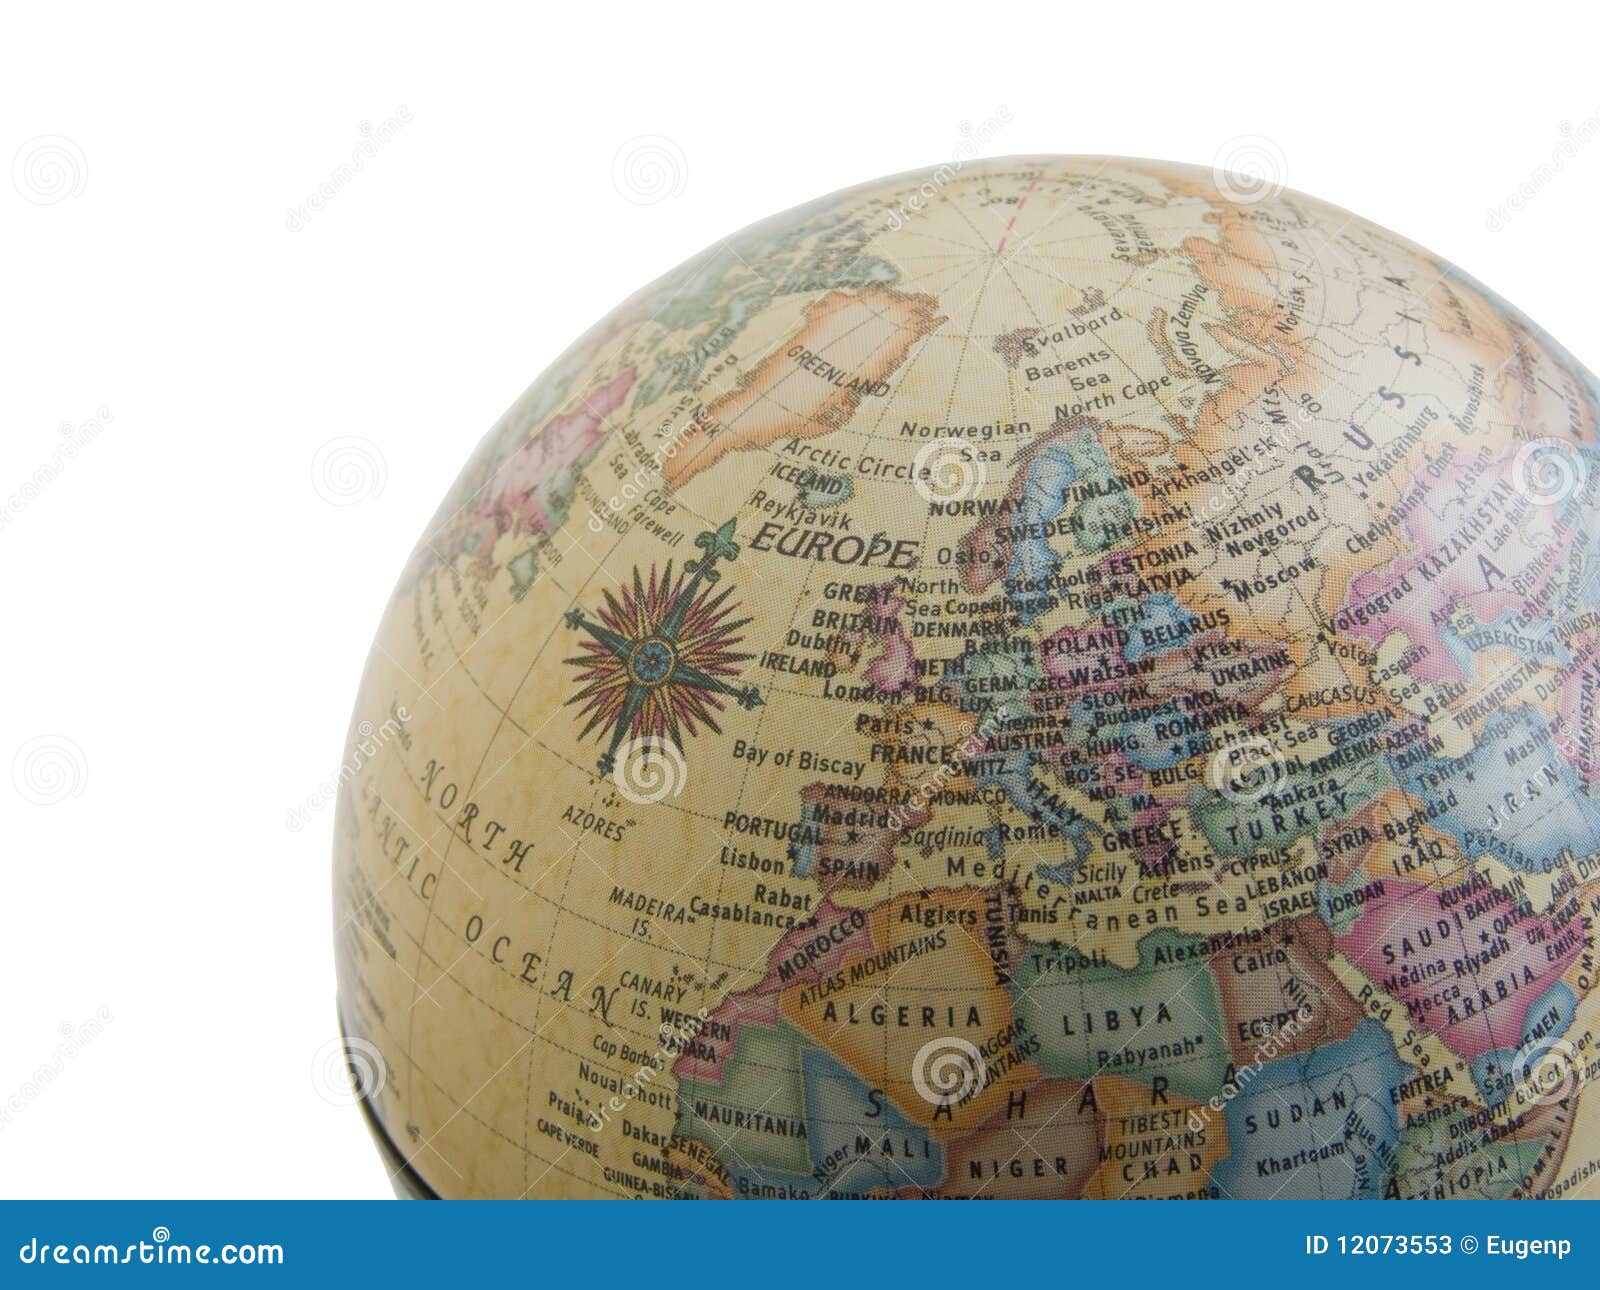 Europe on the globe stock image. Image of bounds, global - 12073553